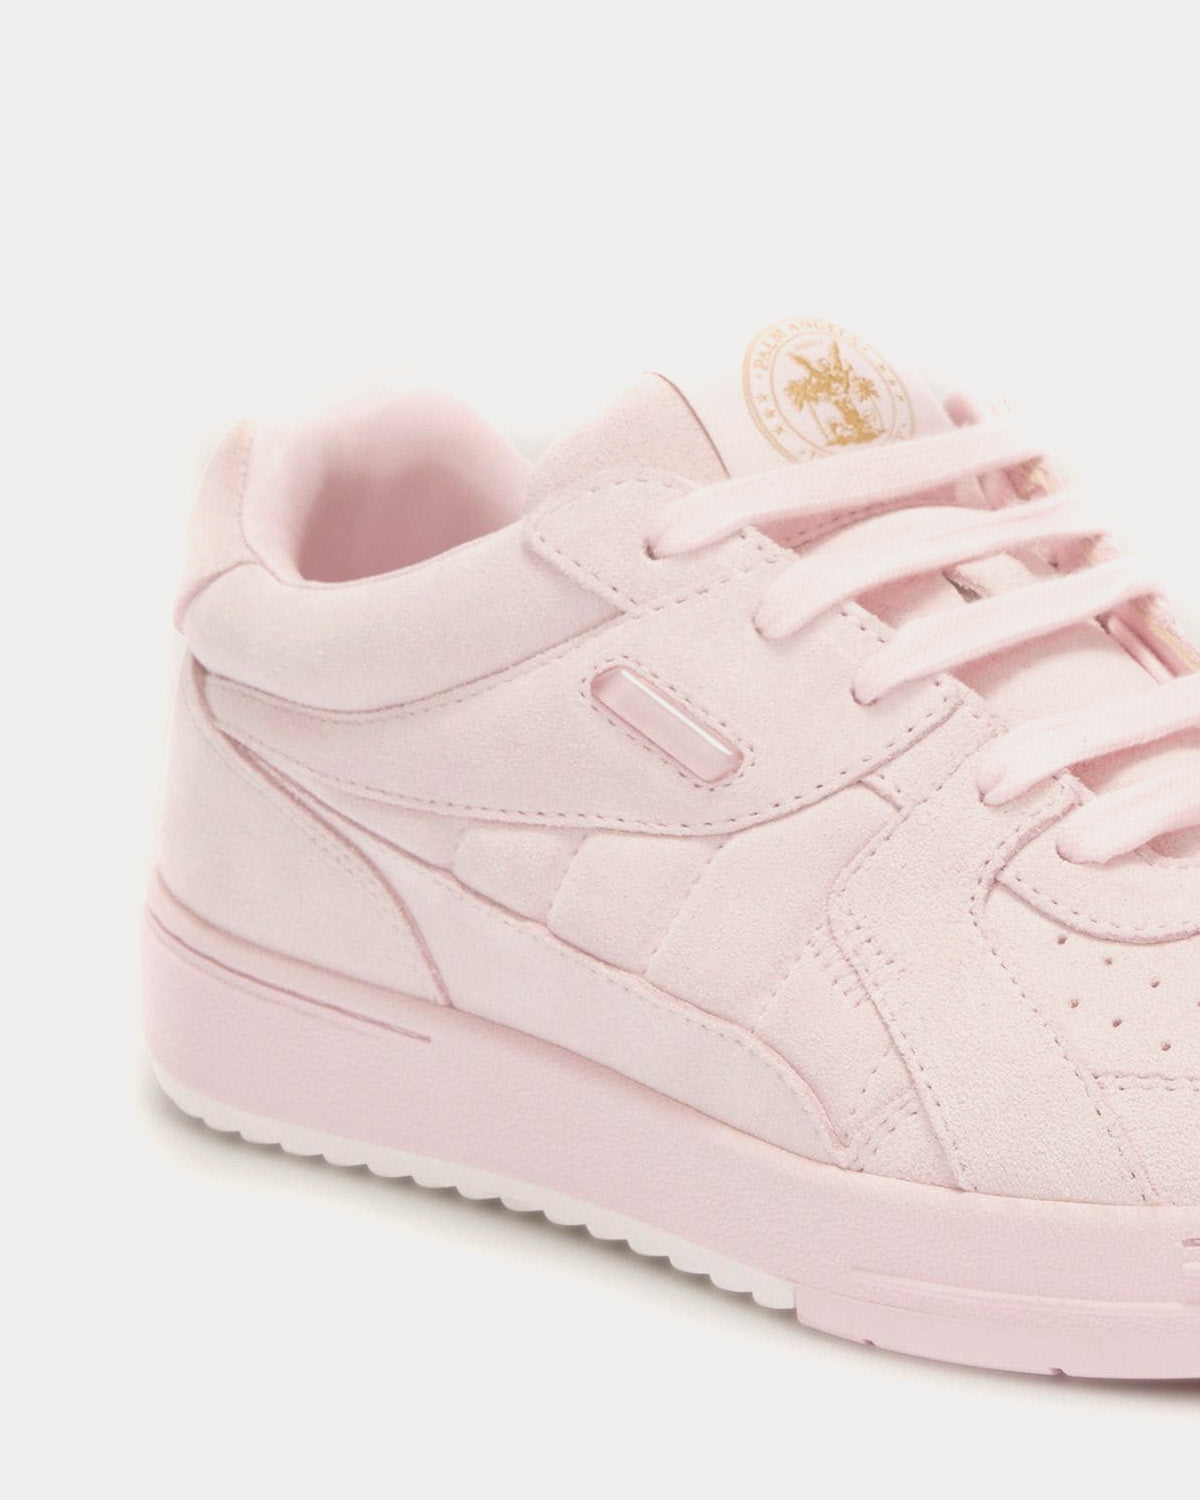 Palm Angels - University Pink / White Low Top Sneakers